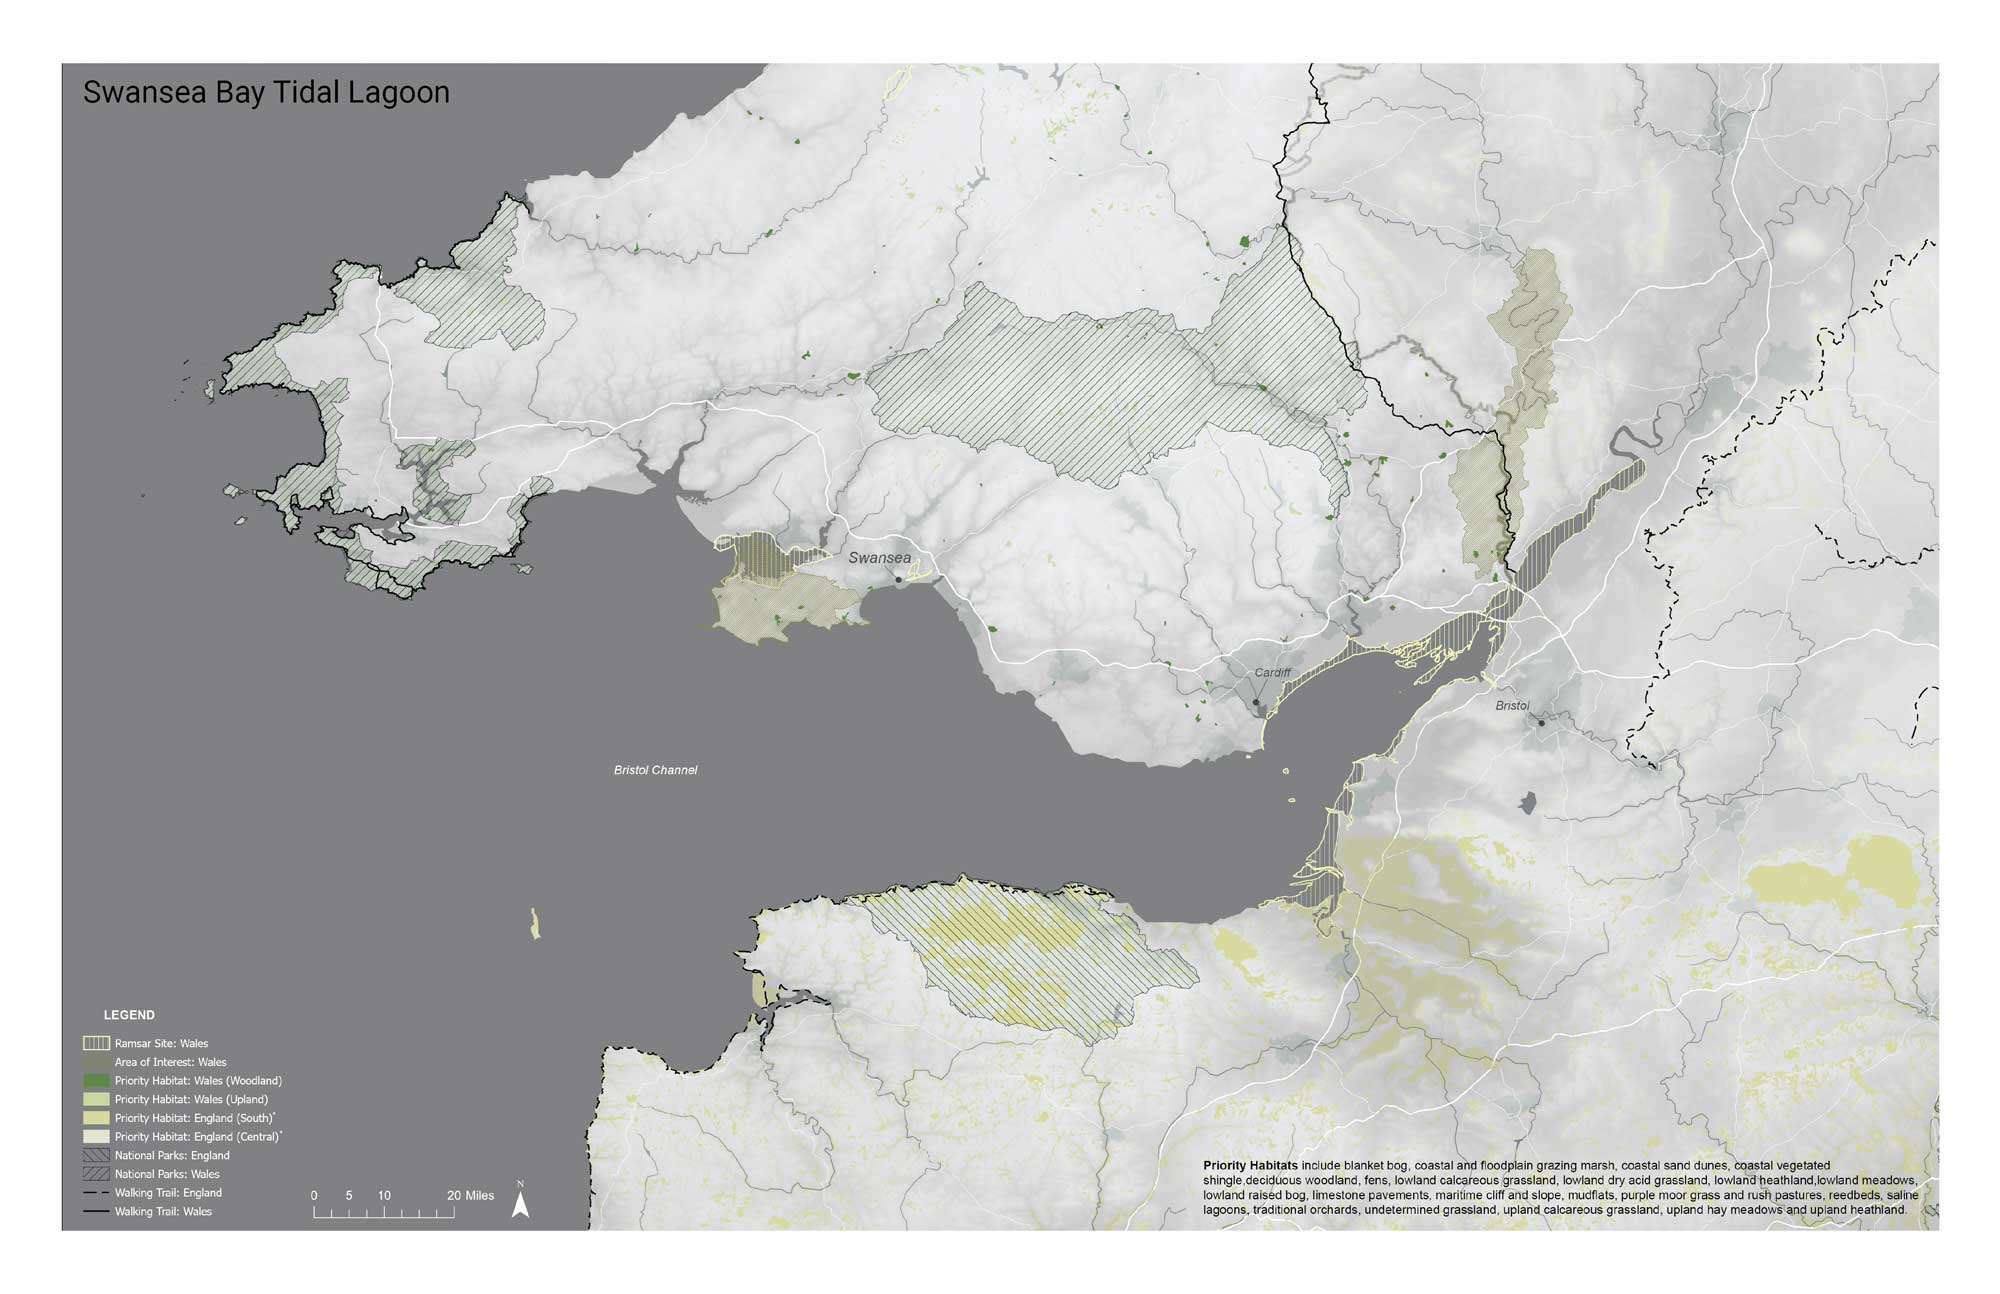 An annotated map of the Swansea Bay tidal lagoon showing the Bristol Channel area in the United Kingdom and some hydrological features.